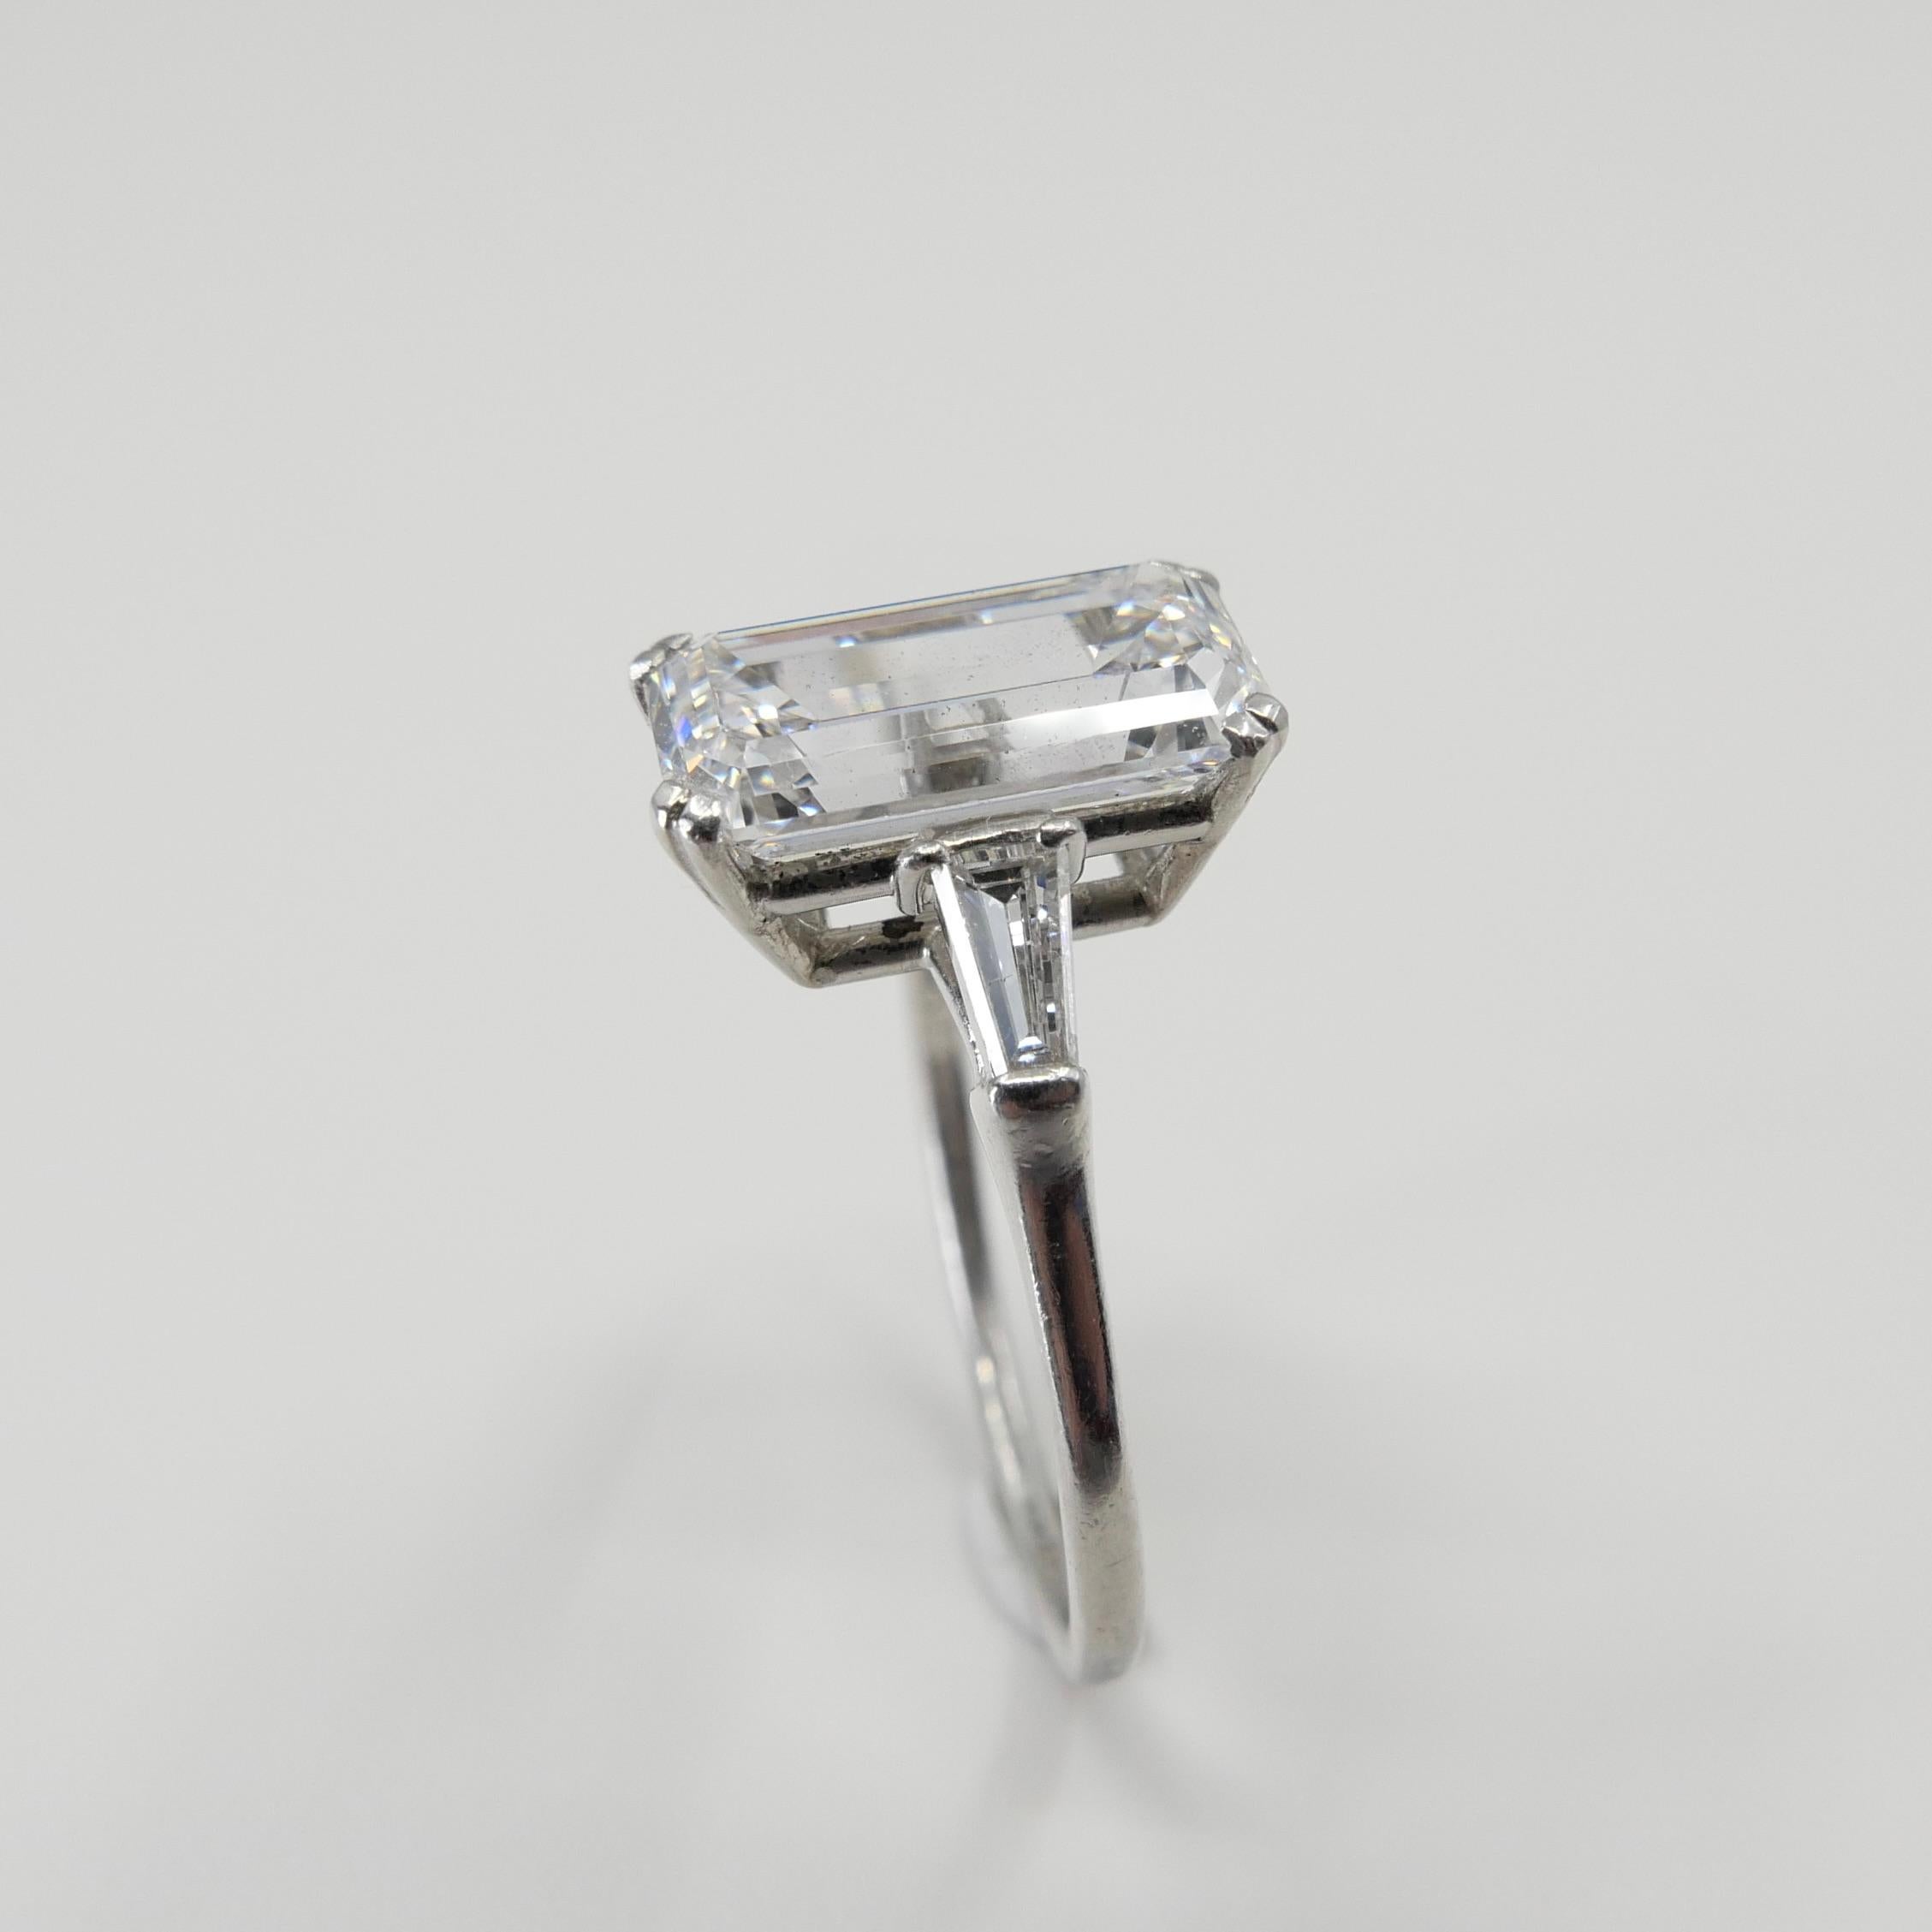 GIA Certified 3 Cts D IF Winston Vintage Diamond Ring, Elongated with 1.78 Ratio 1